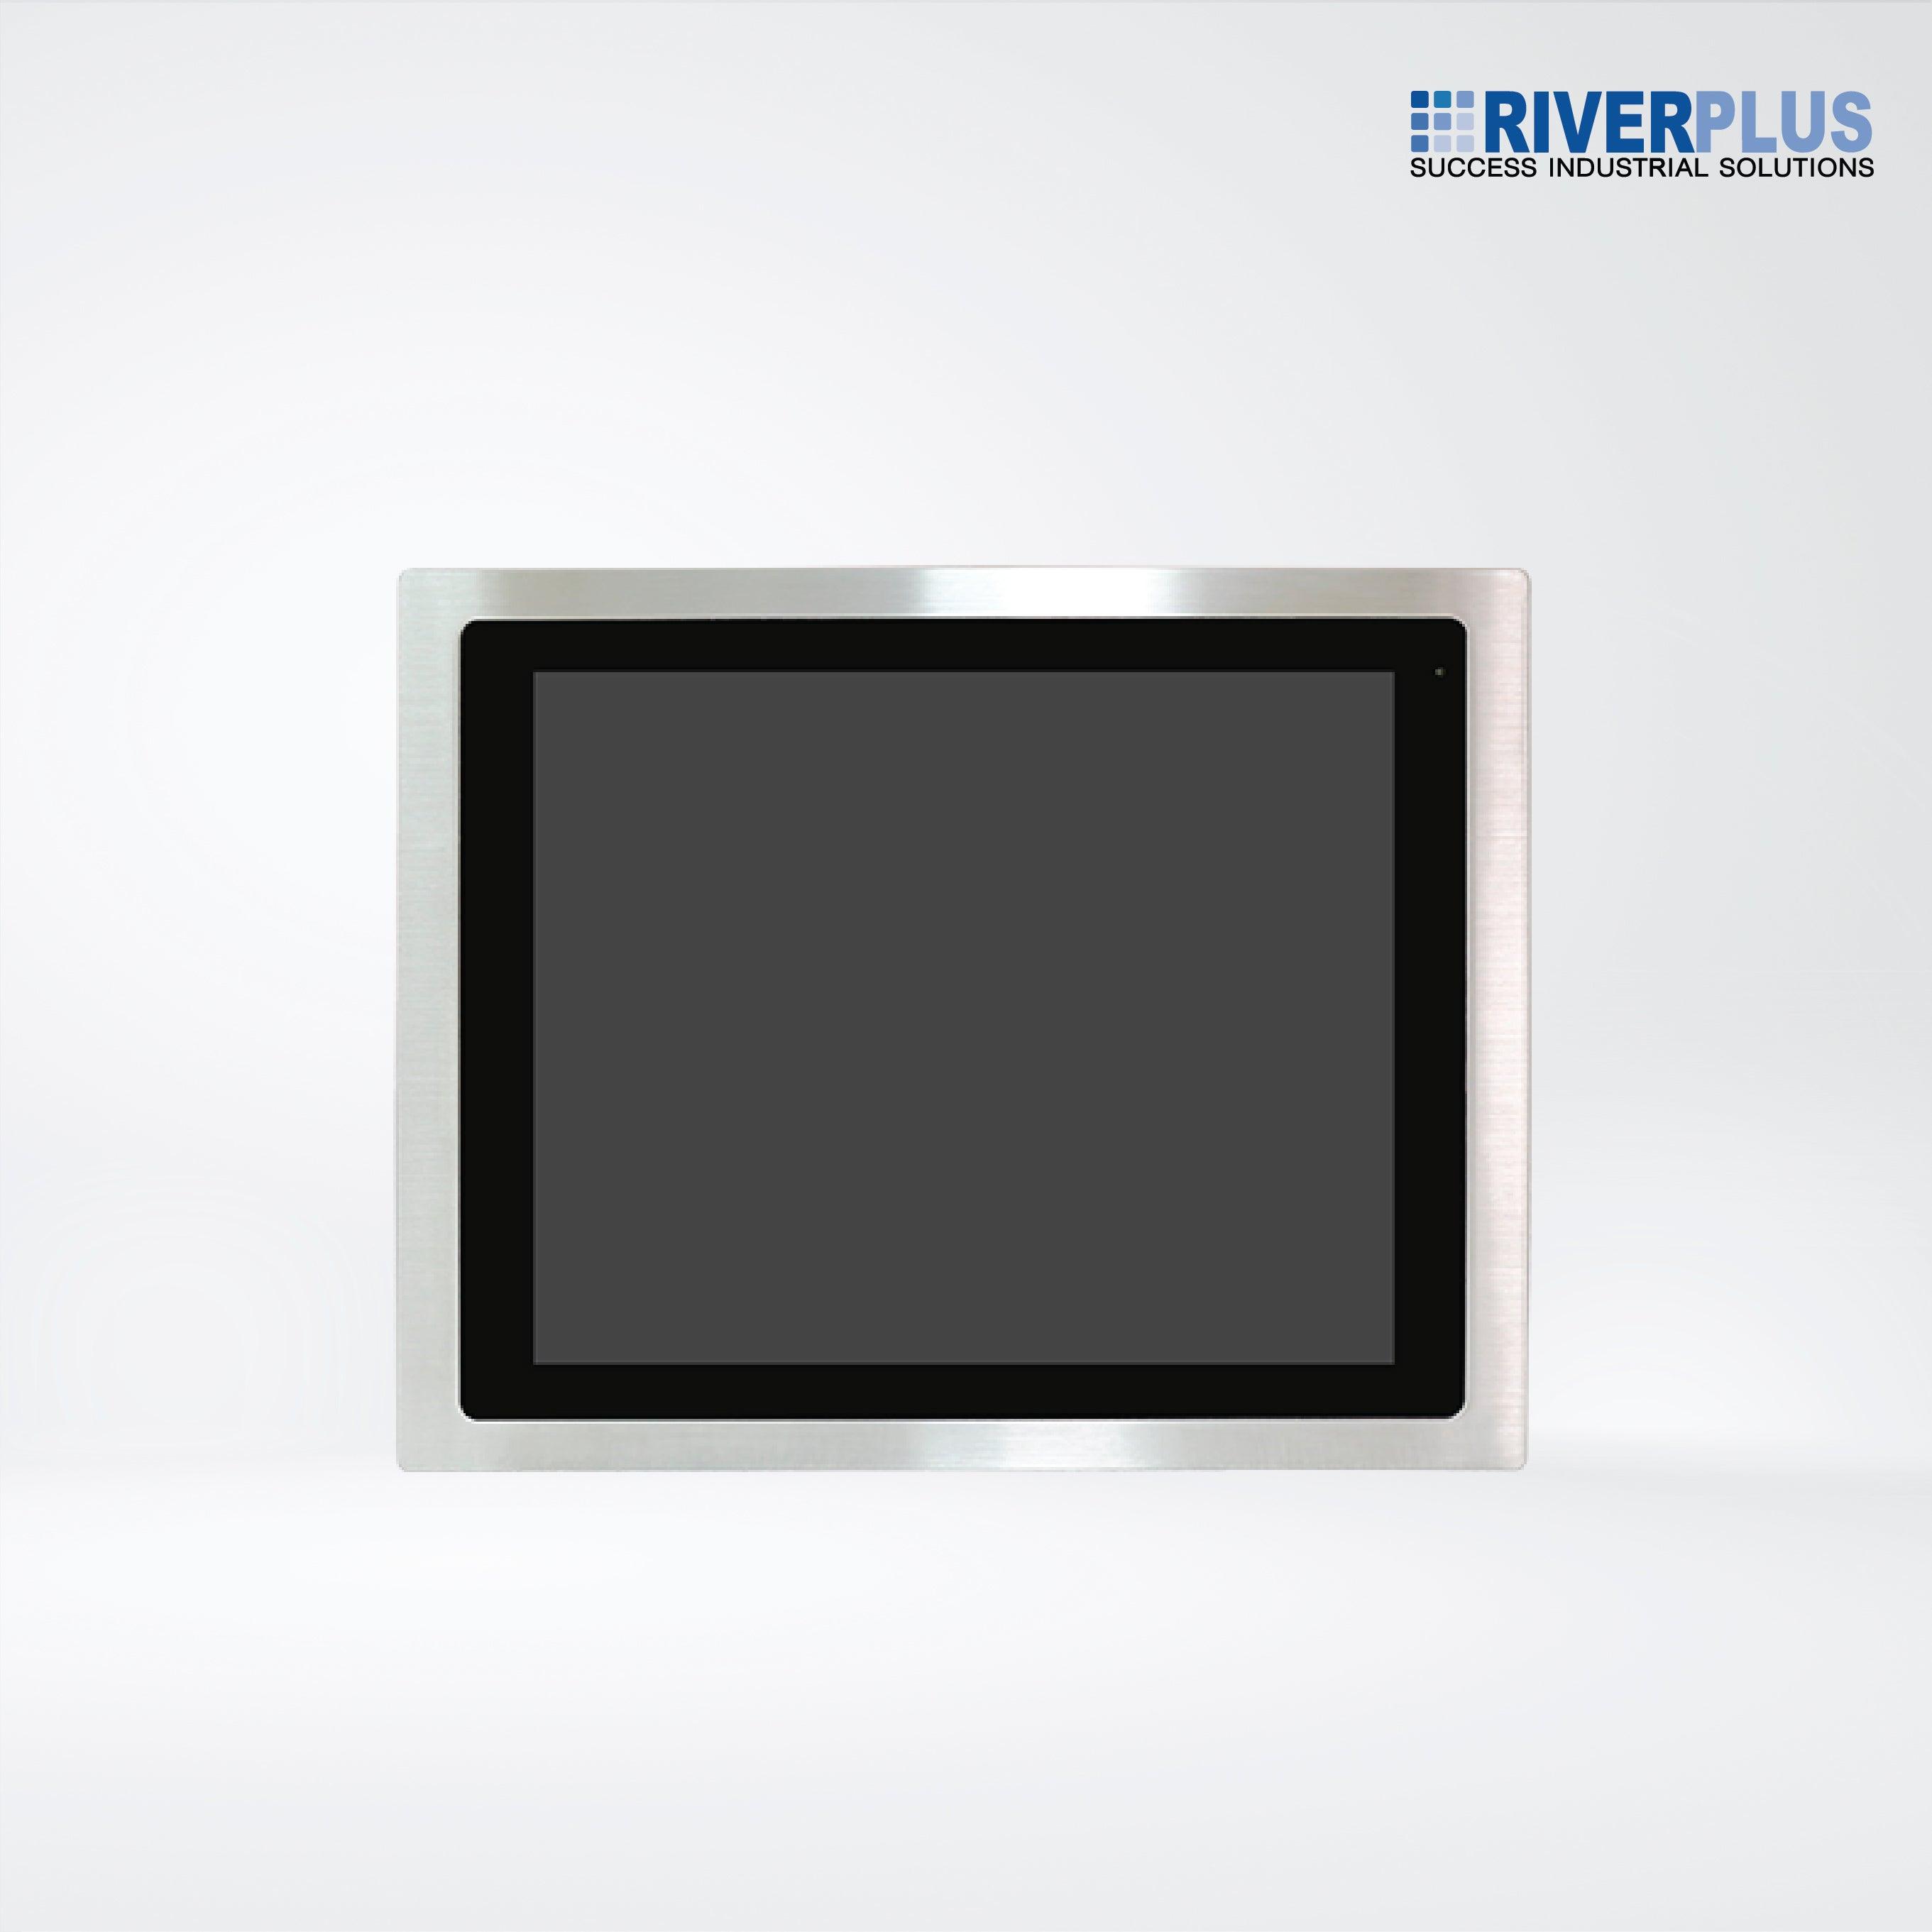 FABS-117G 17” Flat Front Panel IP66 Stainless Chassis Display - Riverplus